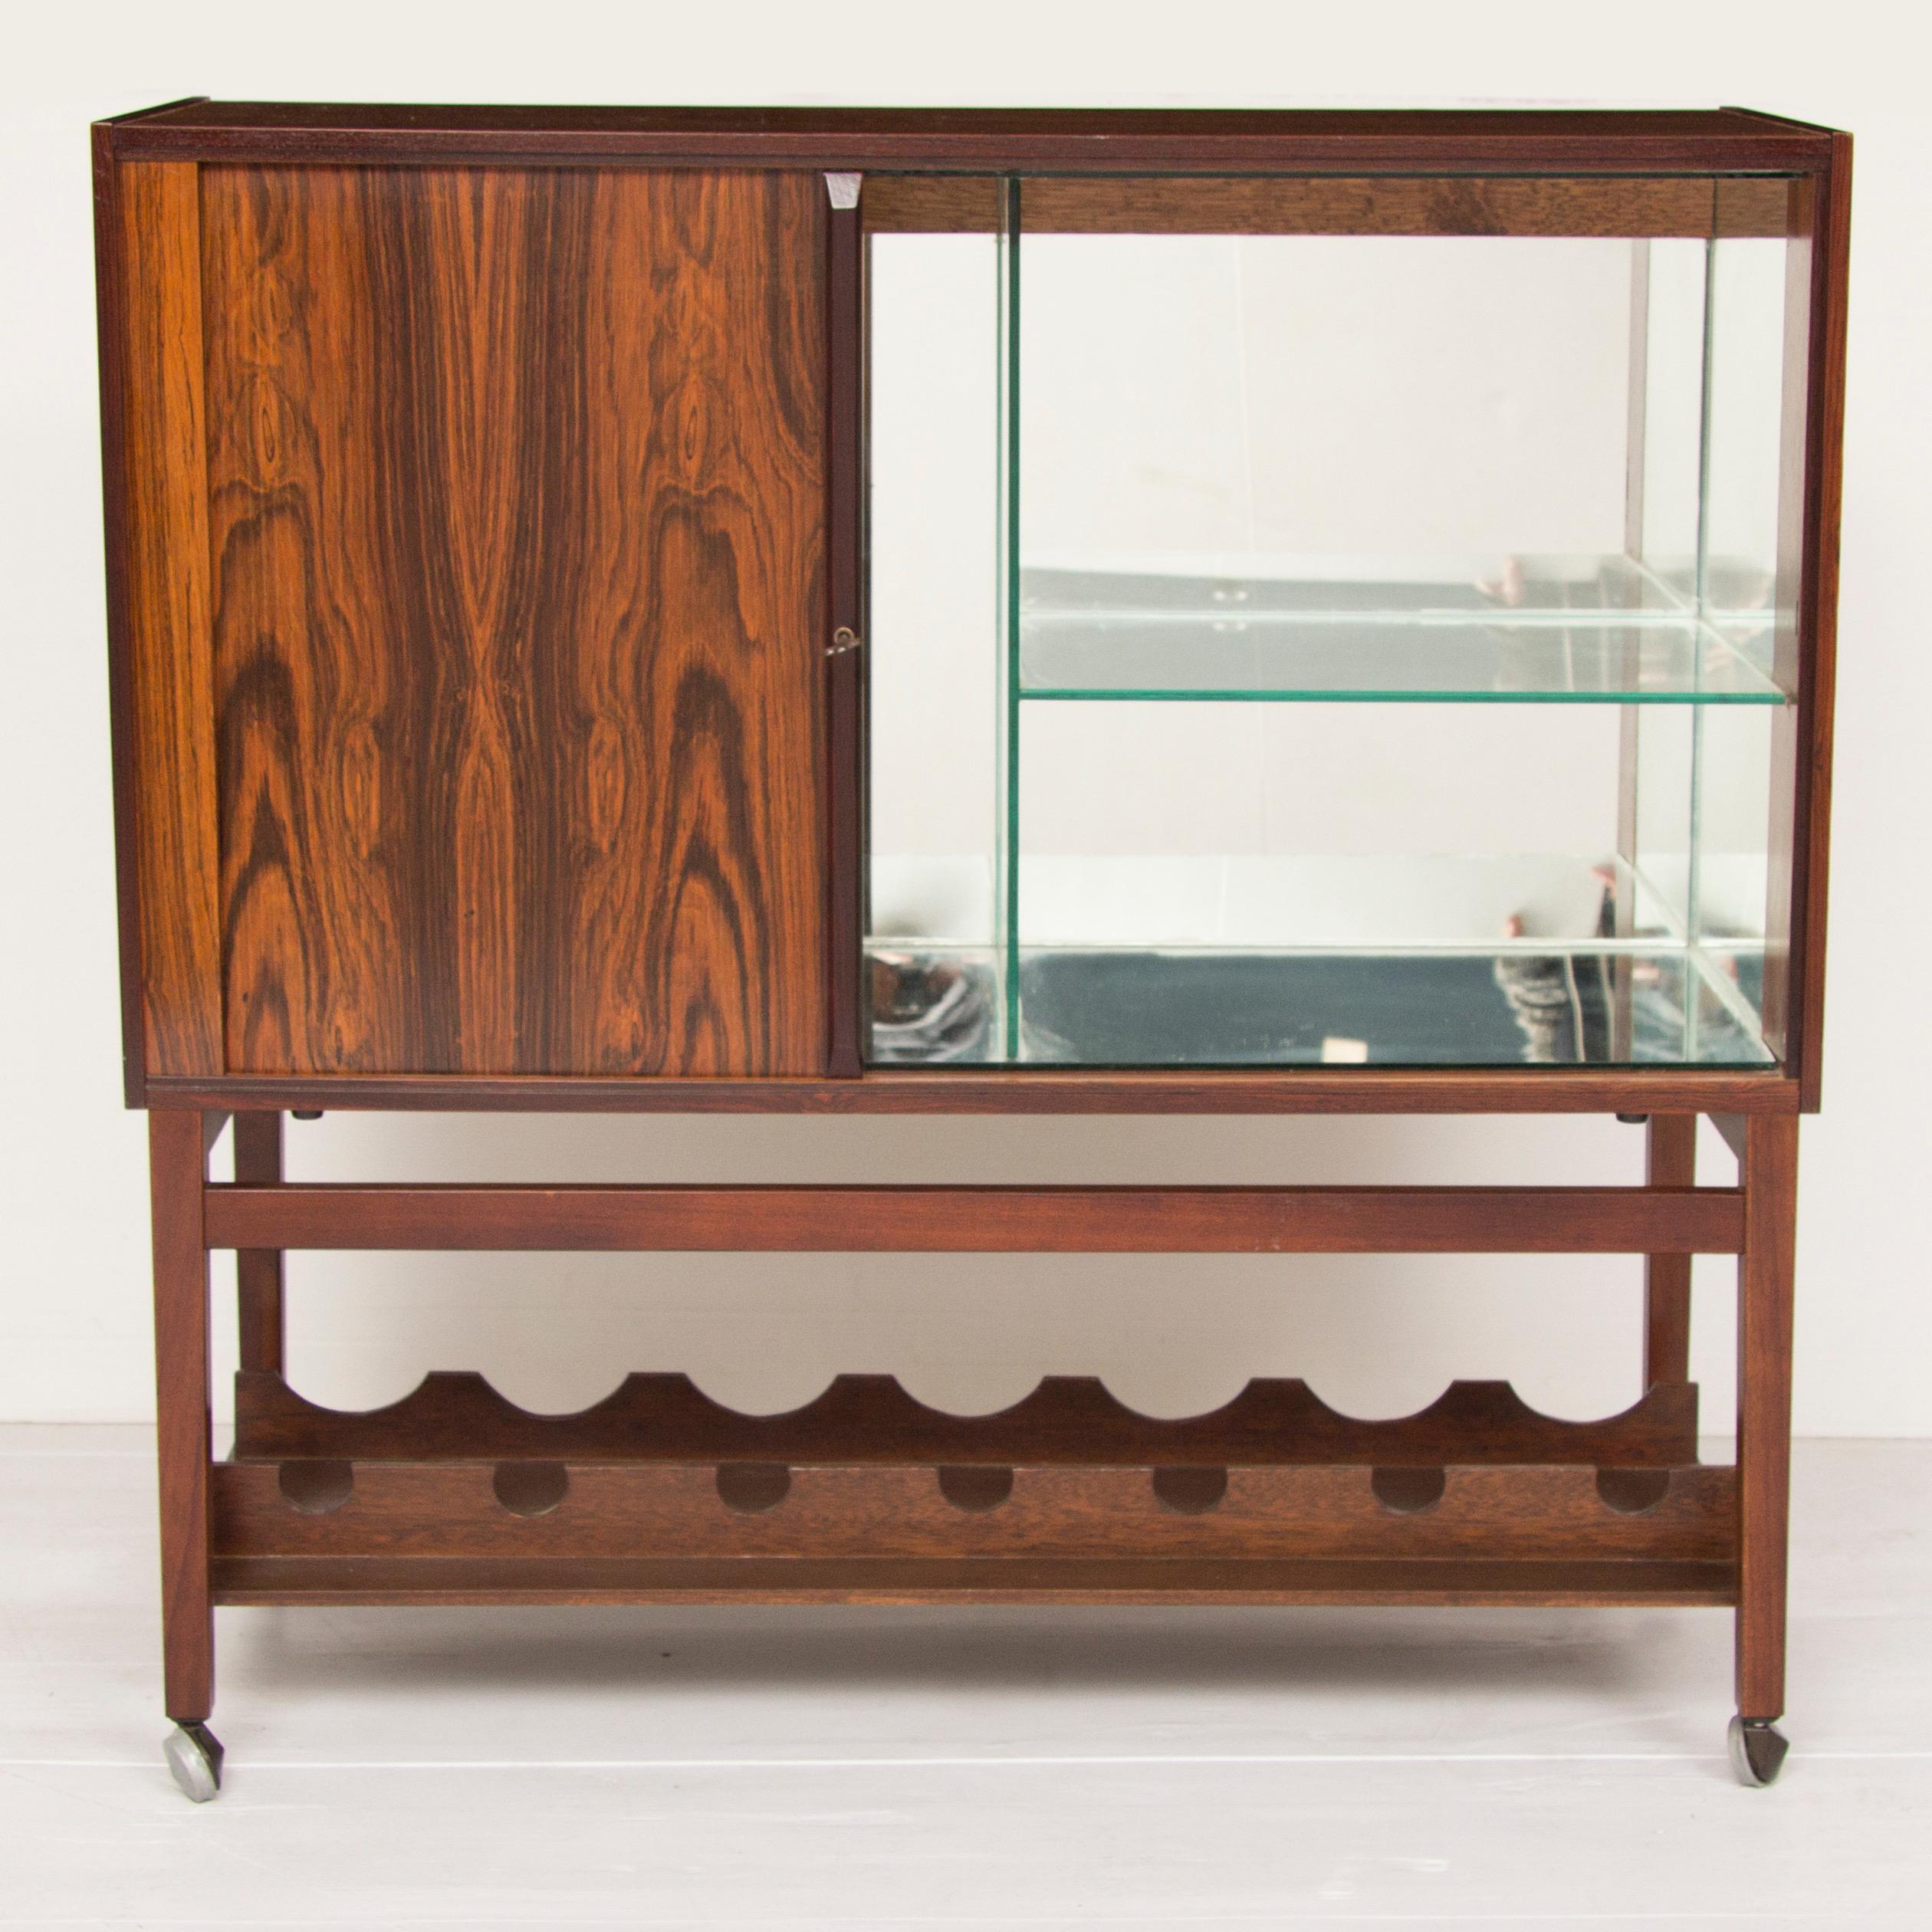 Midcentury rosewood bar cart.
Beautiful rosewood cocktail cabinet with tabour door revealing mirrored interior, fitted below for bottle storage.
Danish, circa 1960
Measures: 85 cm H, 84.5 cm W, 34.5 cm D.